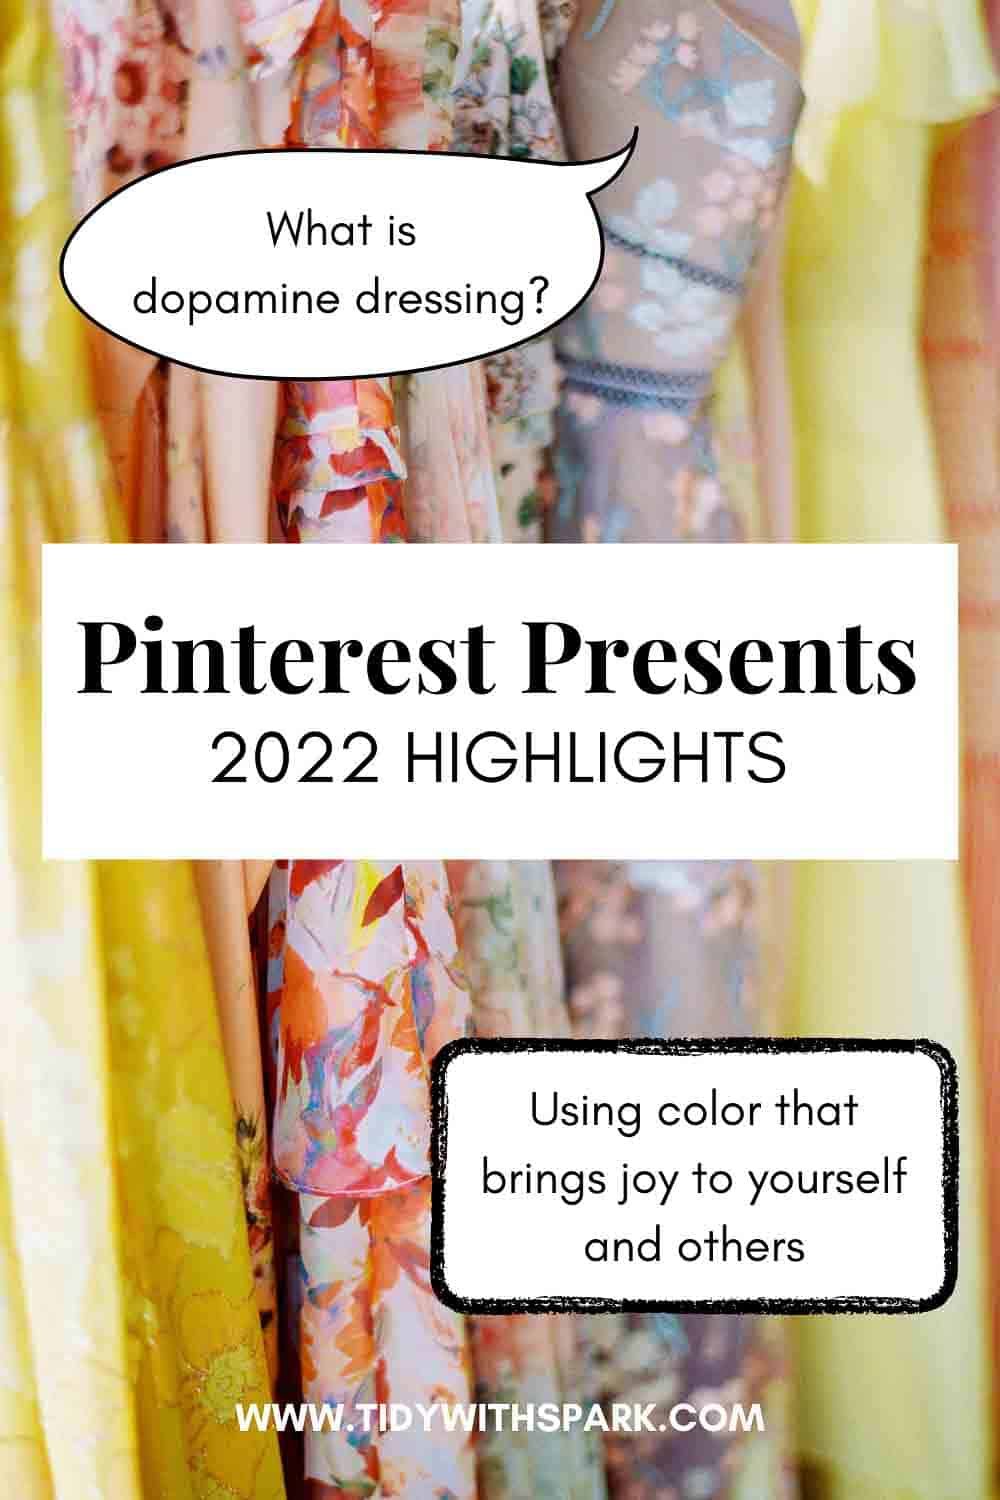 Promotional image for Pinterest Presents 2022 Highlights Pin with spark blog